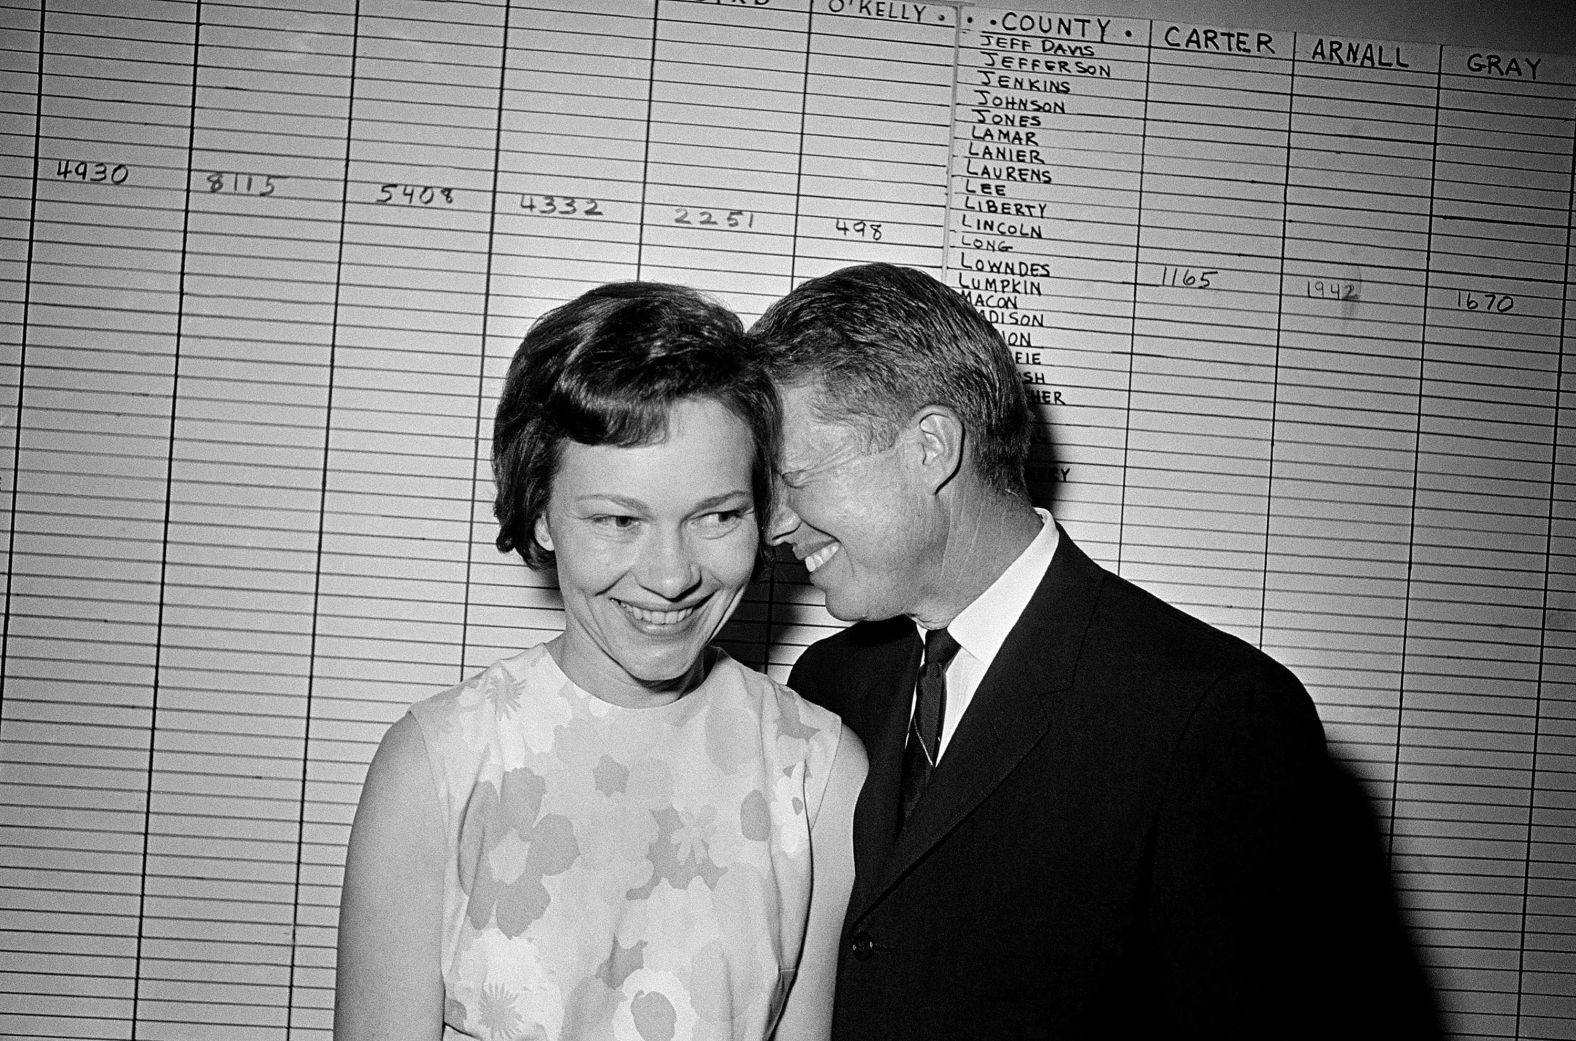 The Carters share a light moment at his campaign headquarters in Atlanta in 1966. Jimmy, a Georgia state senator at the time, ran for governor but lost in the Democratic primary.